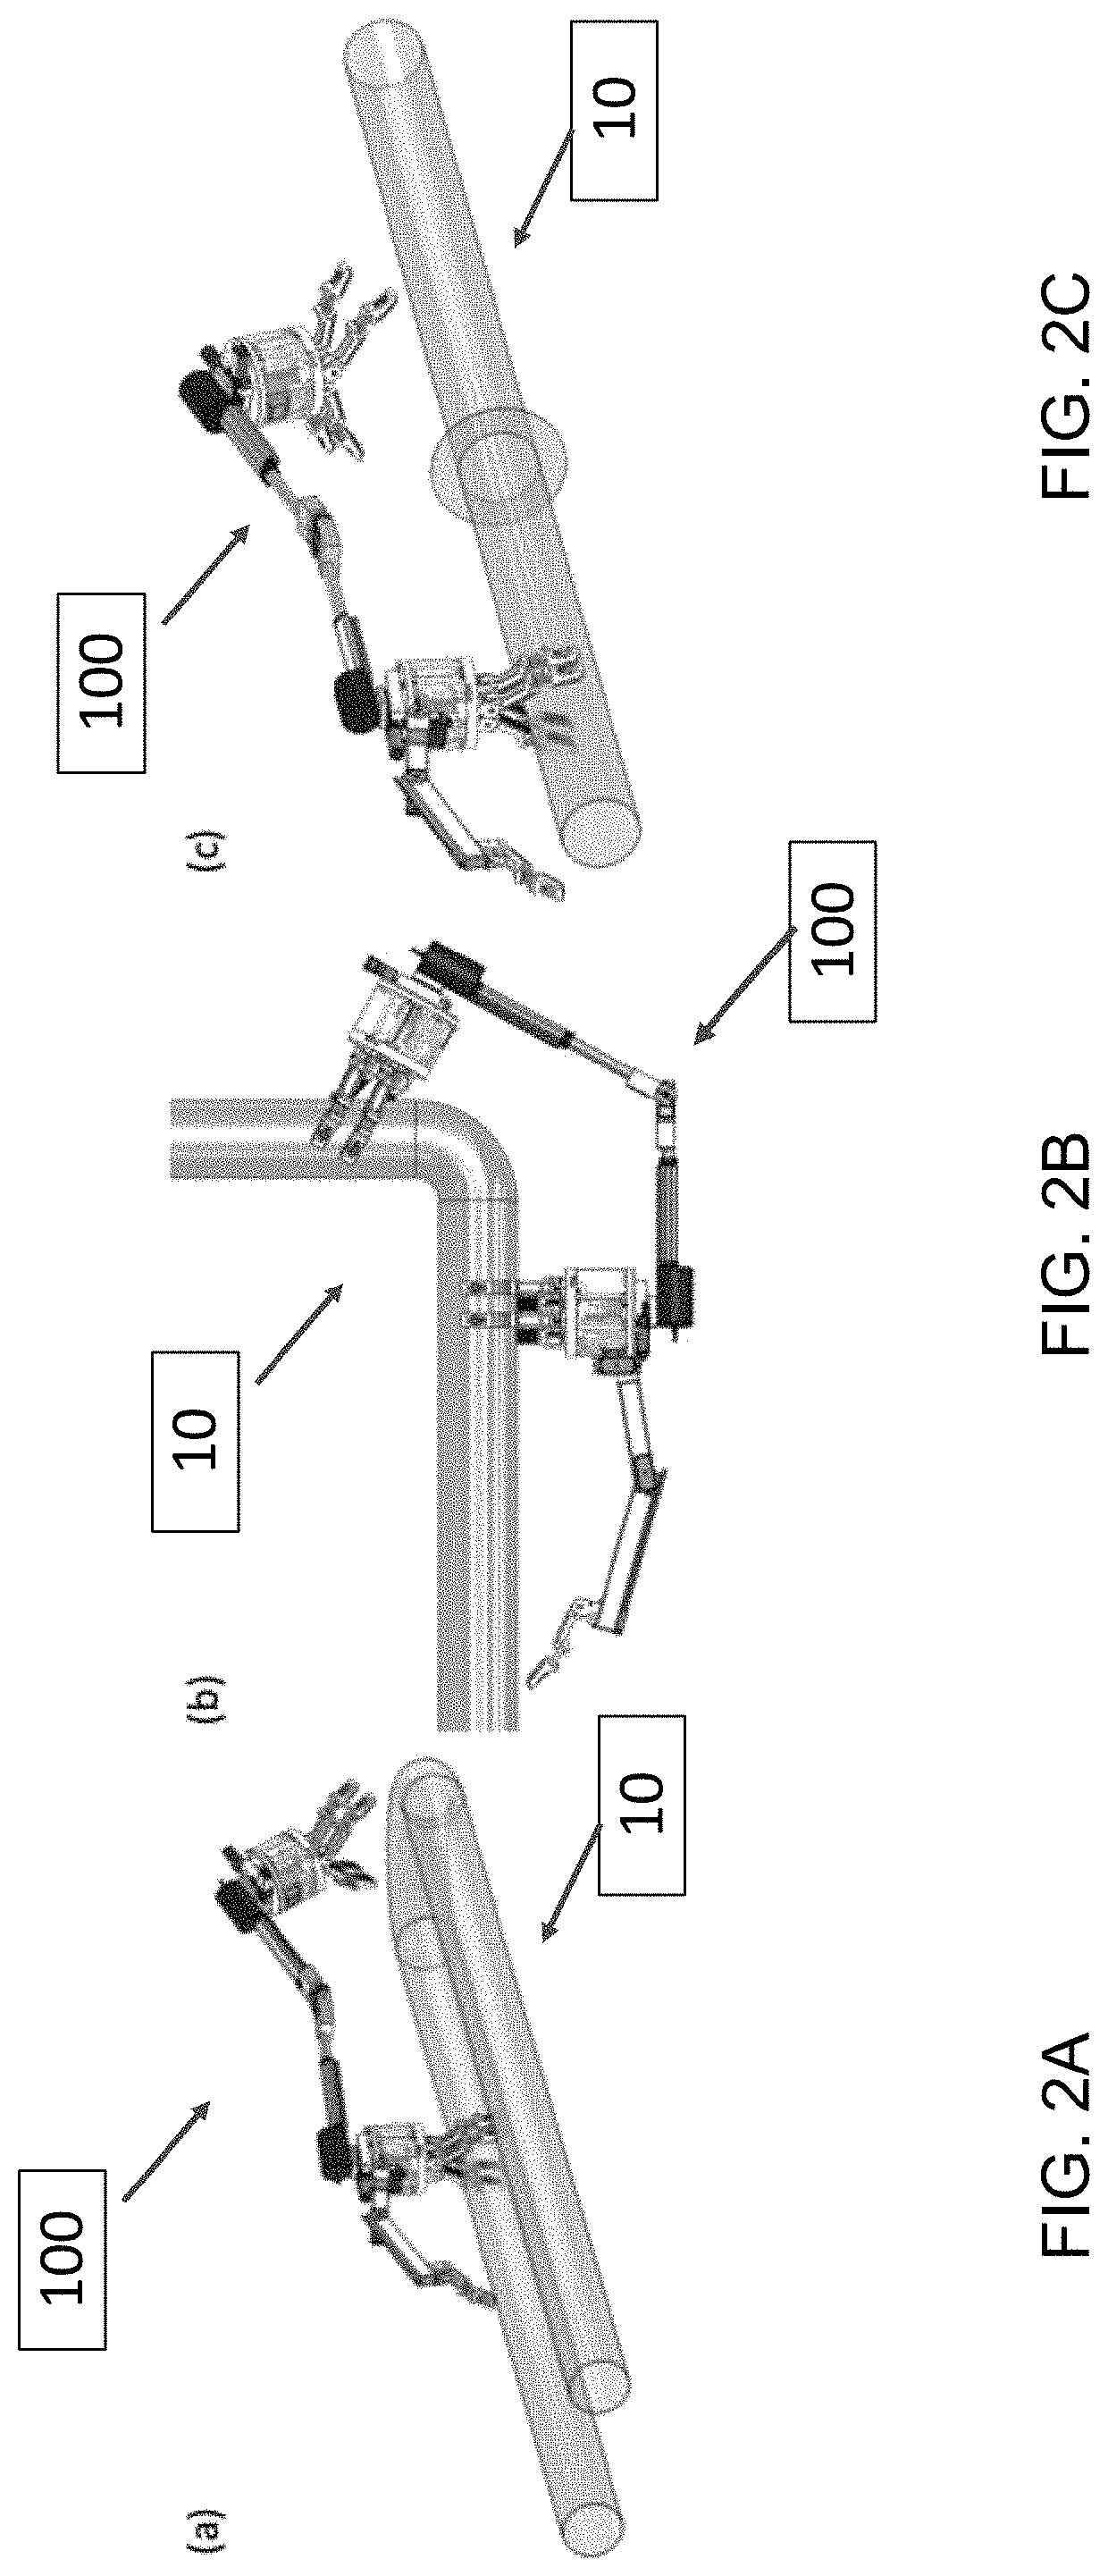 Systems and methods for robotic sensing, repair and inspection